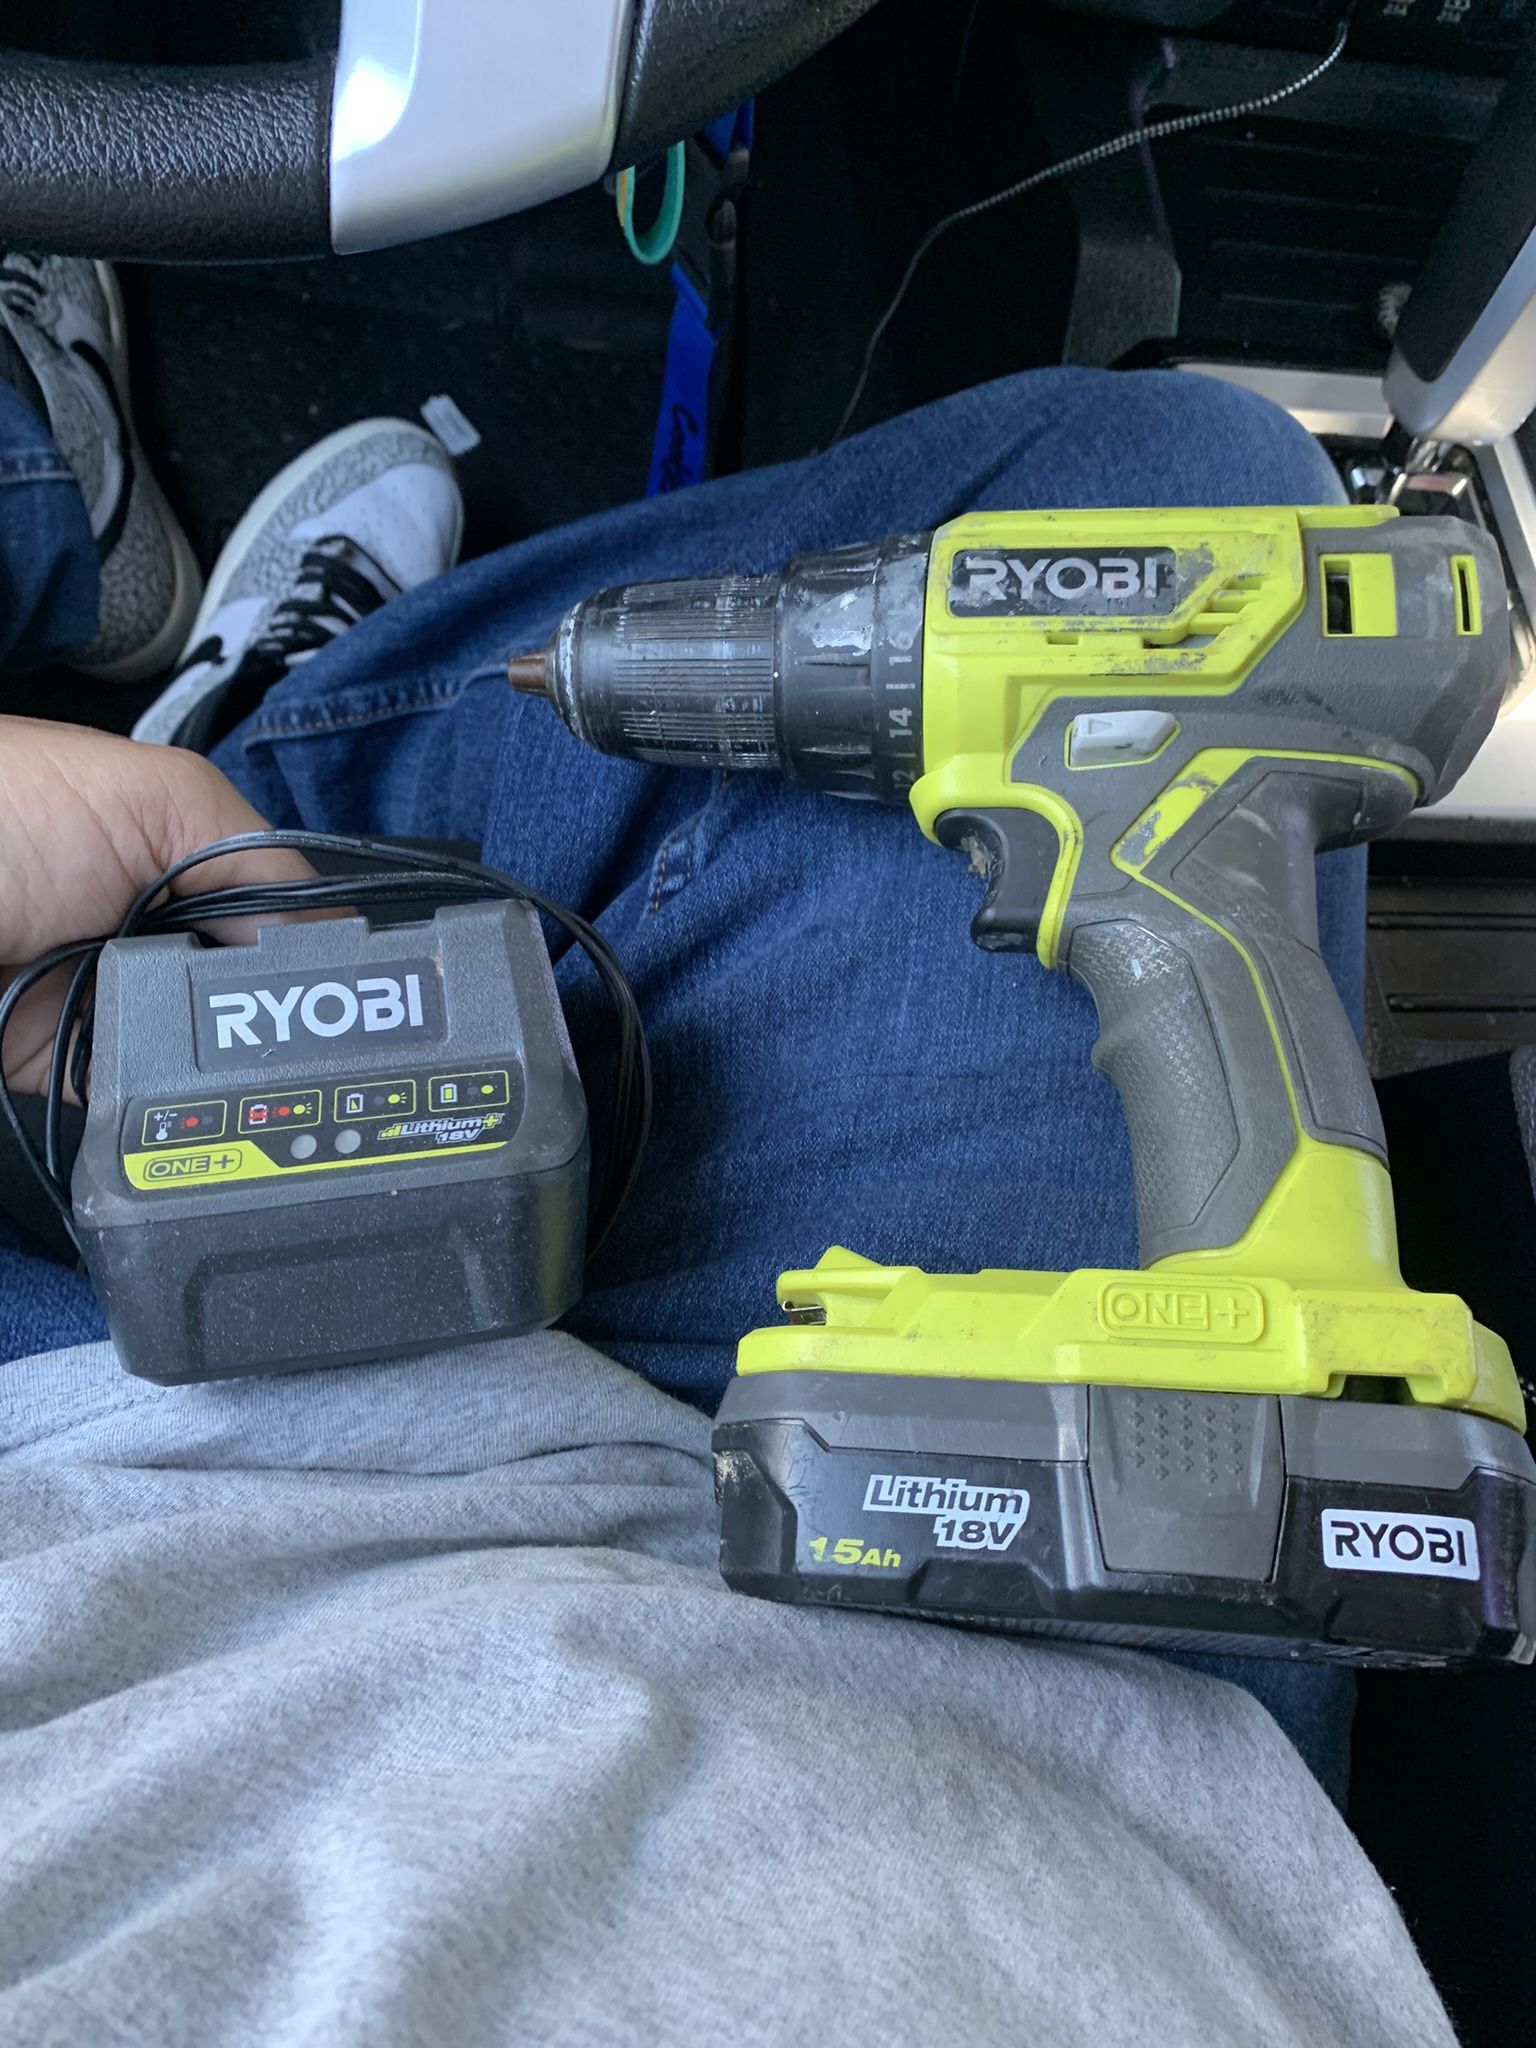 Ryobi Drill With Battery And Charger